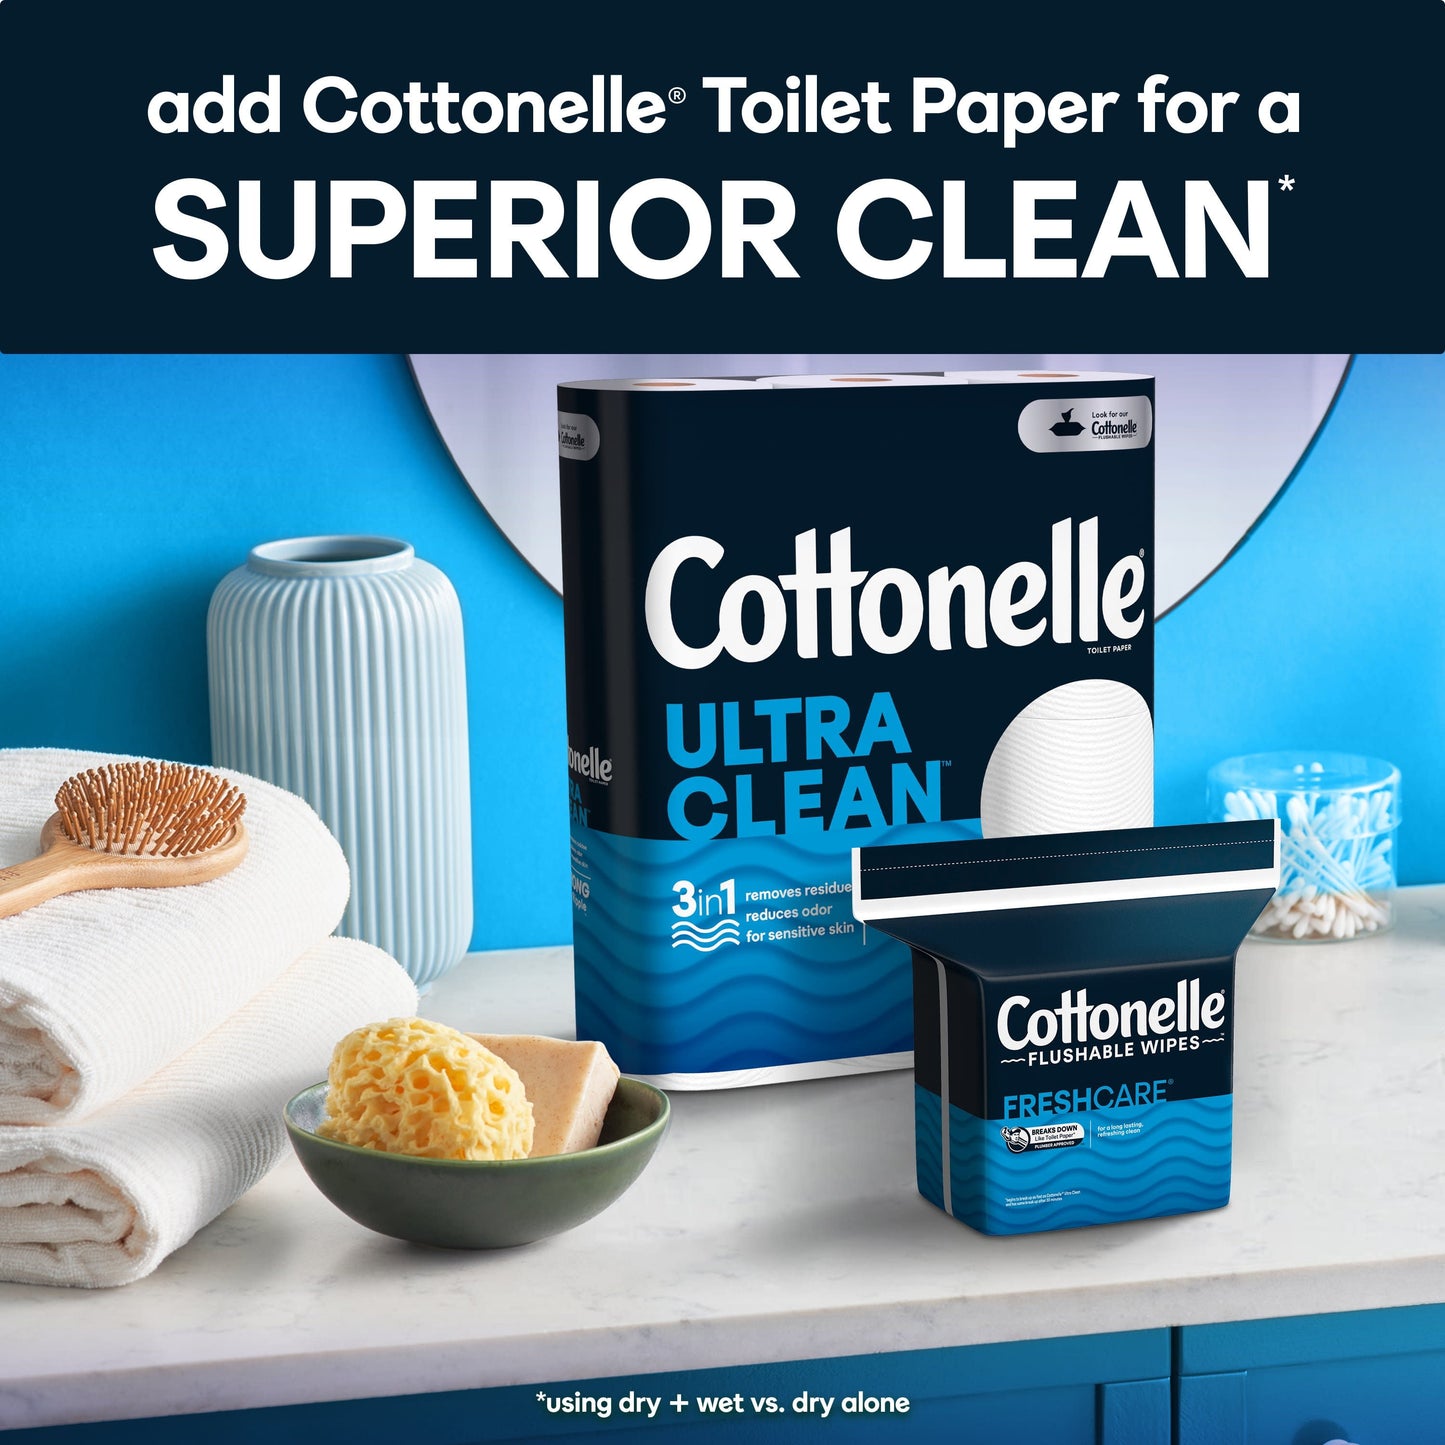 Cottonelle Fresh Care Flushable Wipes, 1 Resealable Bag, 168 Wipes per Pack (168 Total)